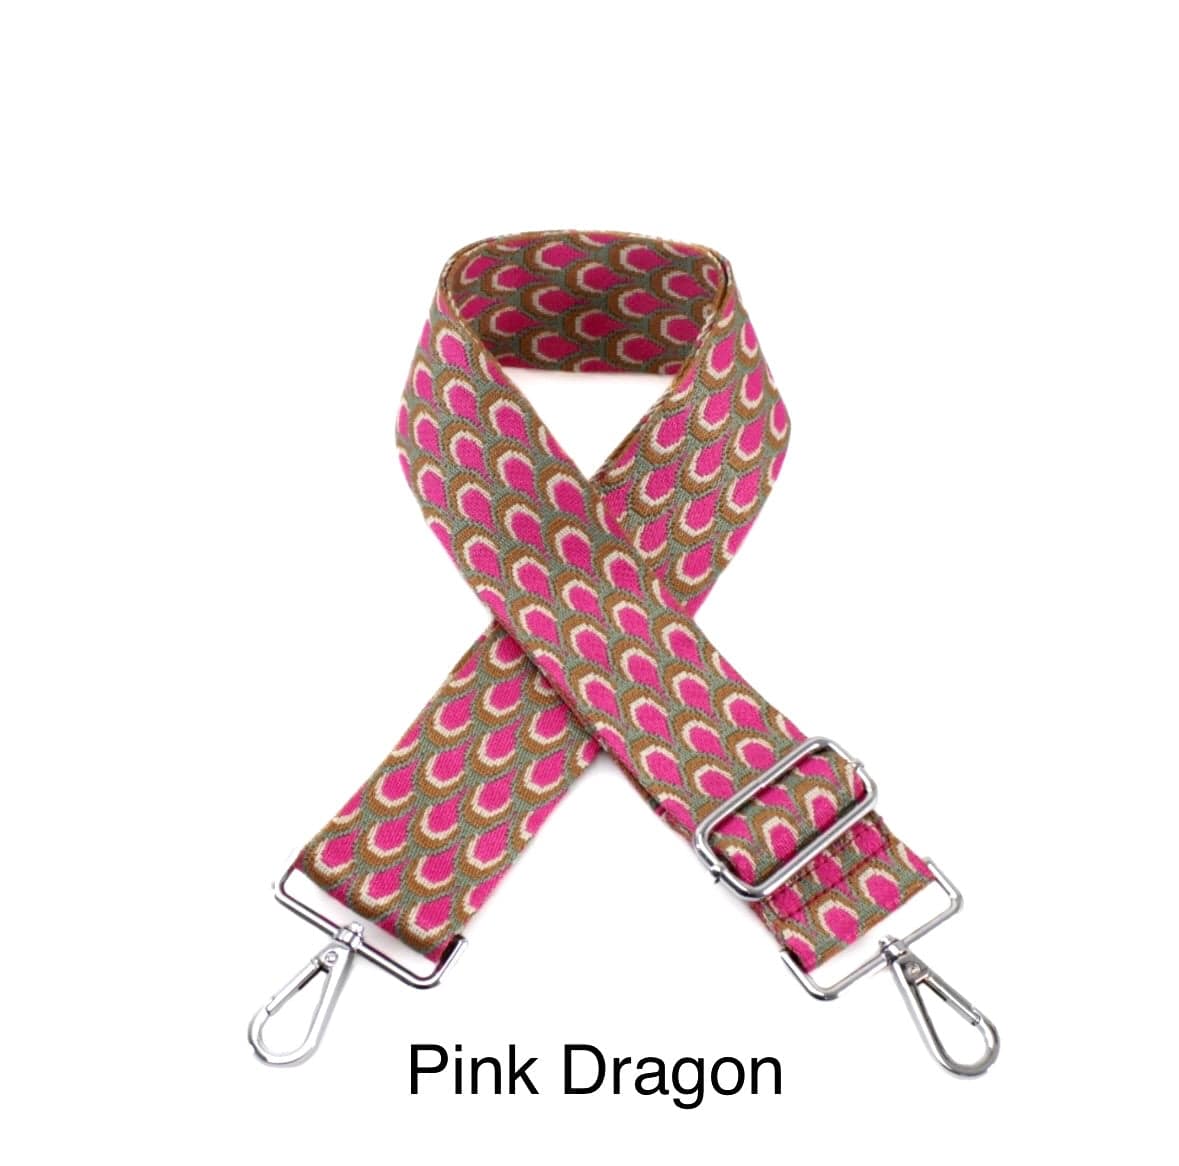 lusciousscarves Handbags Pink Dragon Handbag Bag Straps with SILVER HARDWARE - Lots of colours available.